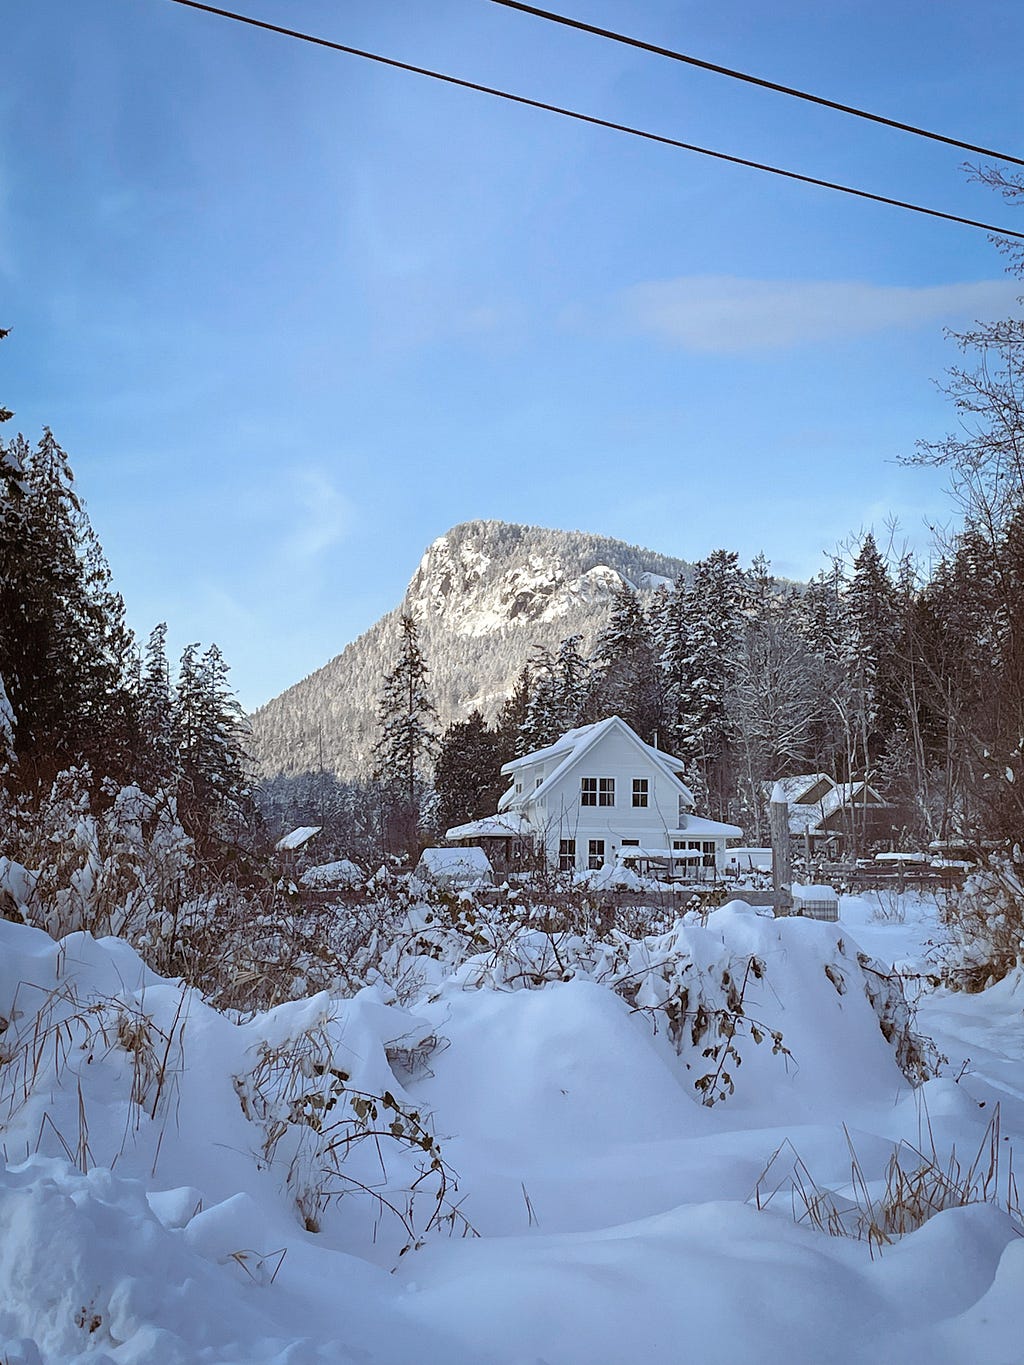 A scenic winter view of a rural house with a snow covered mountain in the background